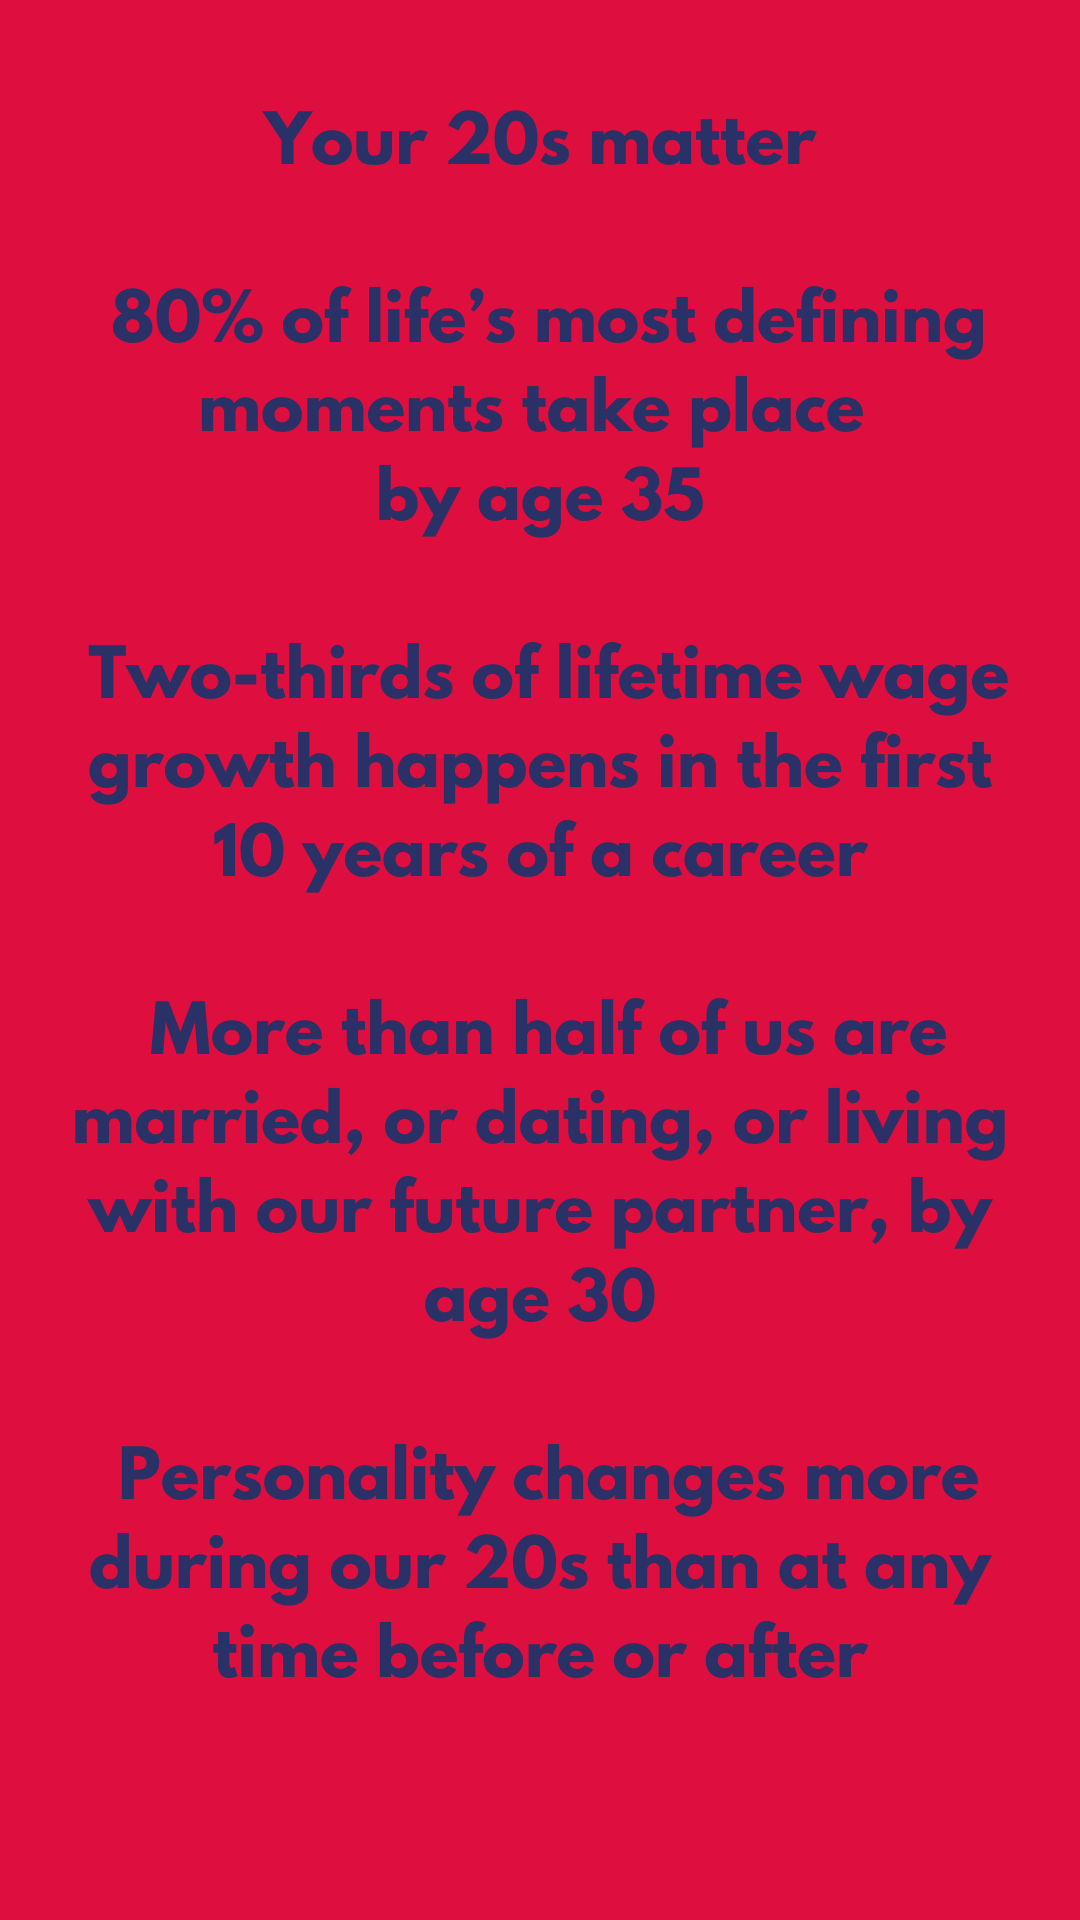 Your twenties matter. Eighty percent of life’s most defining moments take place by age thirty-five. Two-thirds of lifetime wage growth happens in the first ten years of a career. More than half of us are married, or dating, or living with our future partner, by age thirty. Personality changes more during our twenties than at any time before or after. 